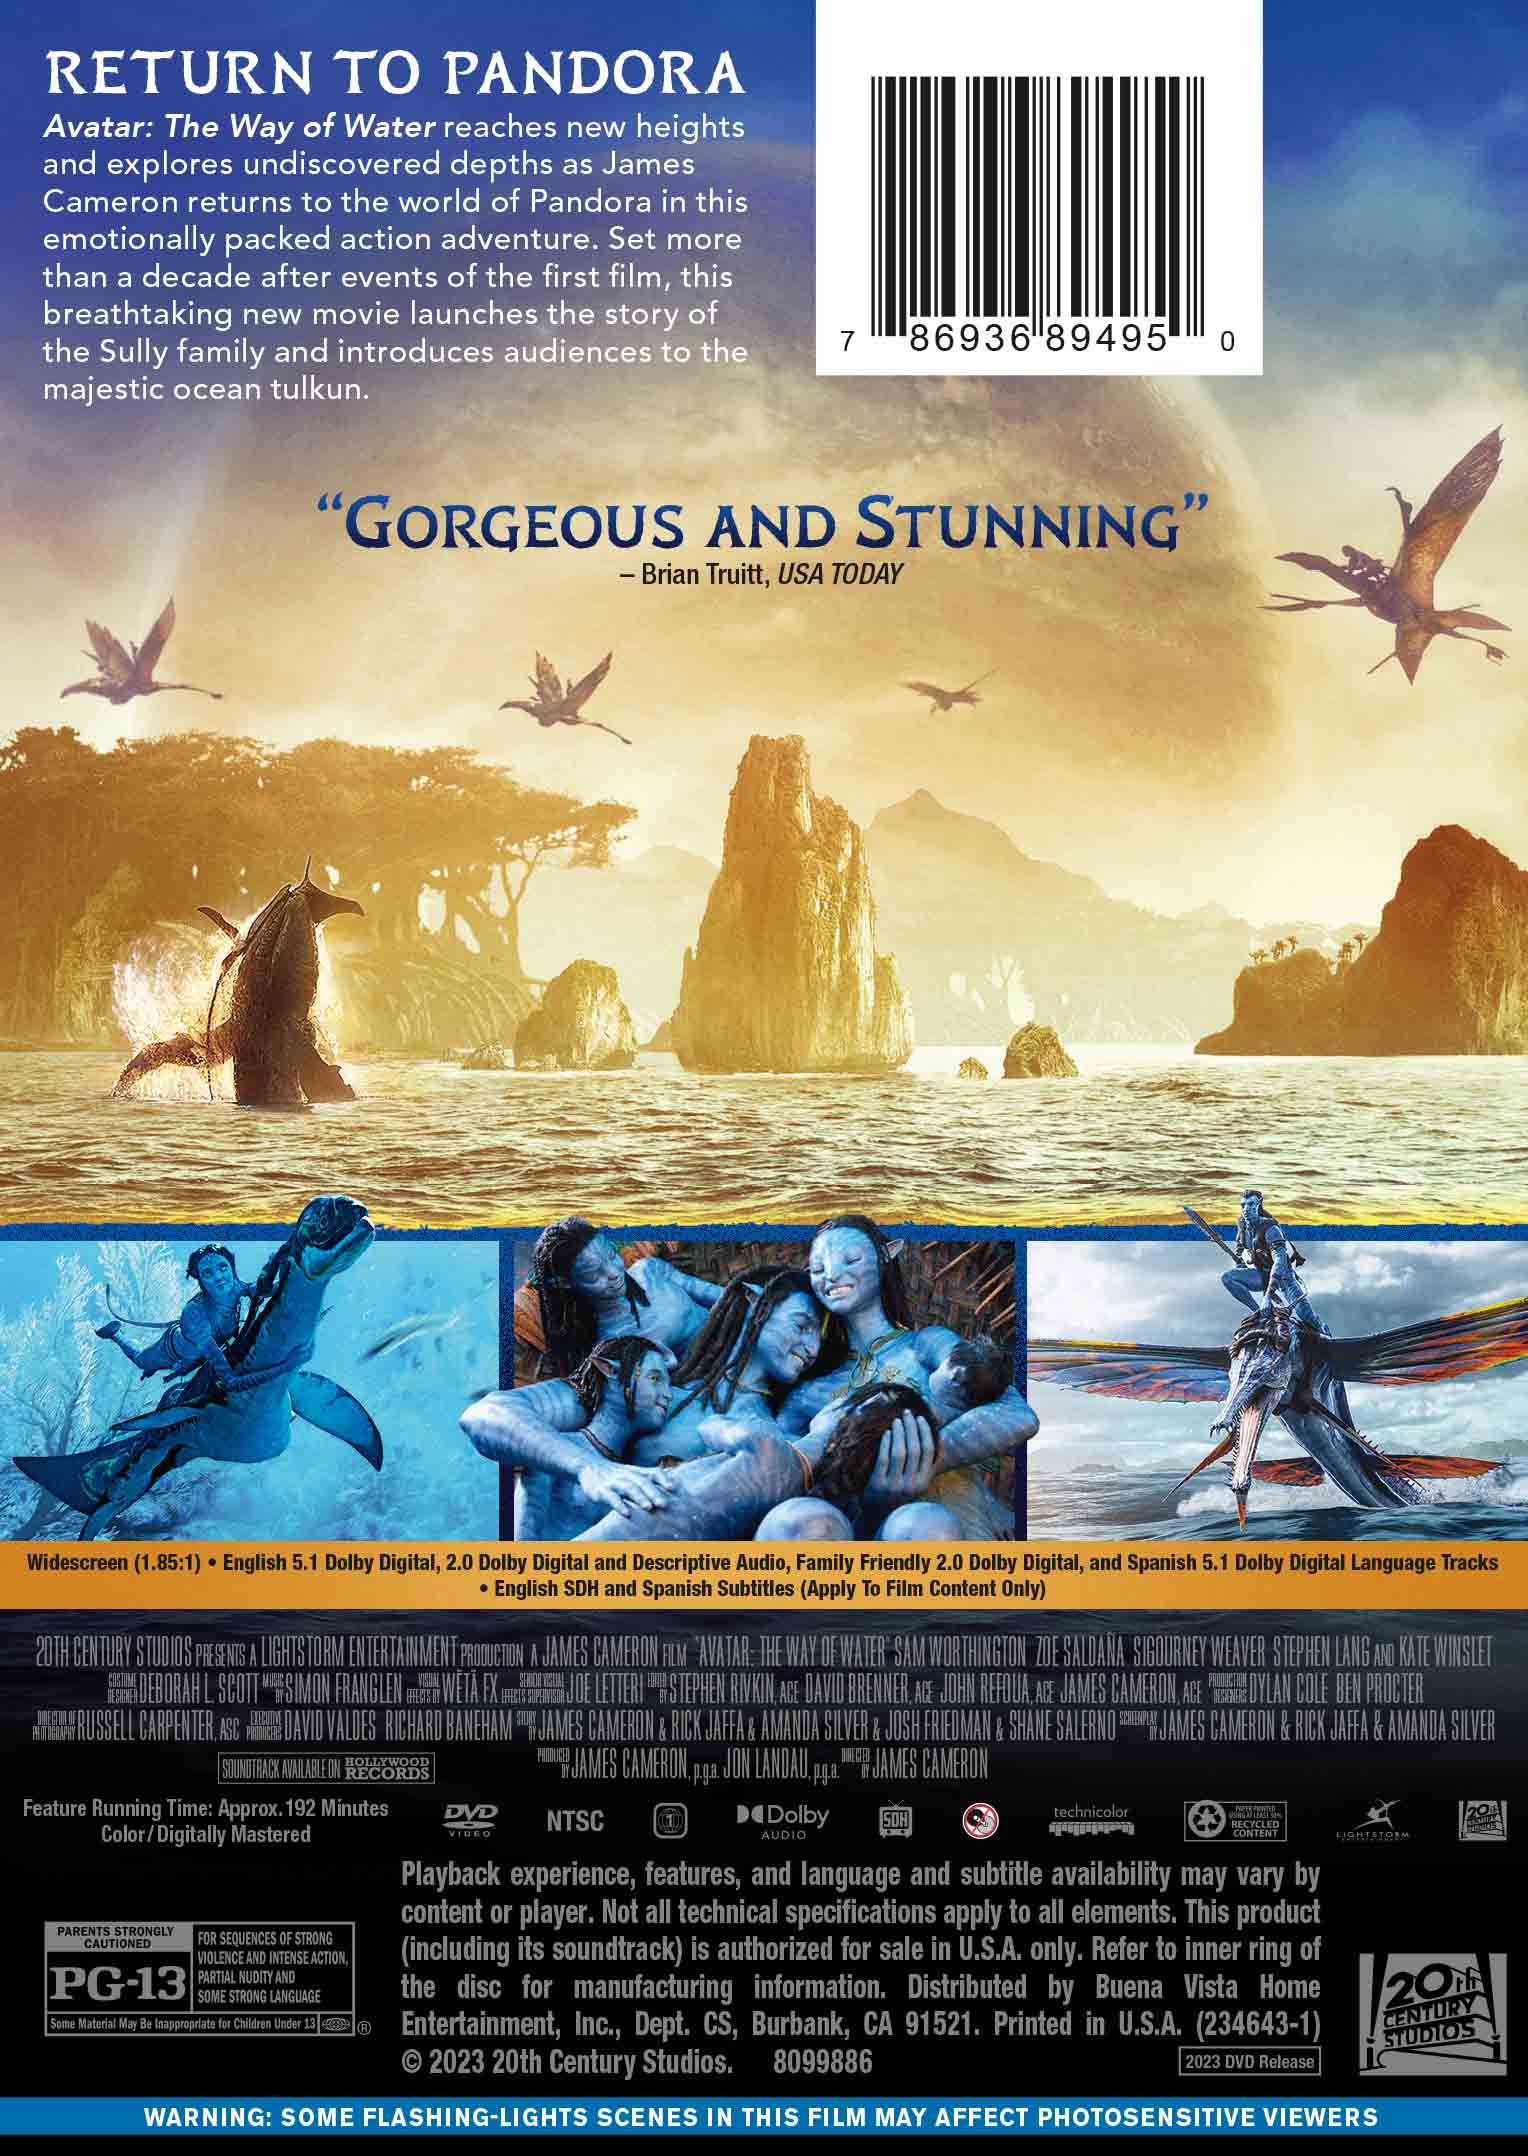 Avatar: The Way of Water (DVD) - image 2 of 3